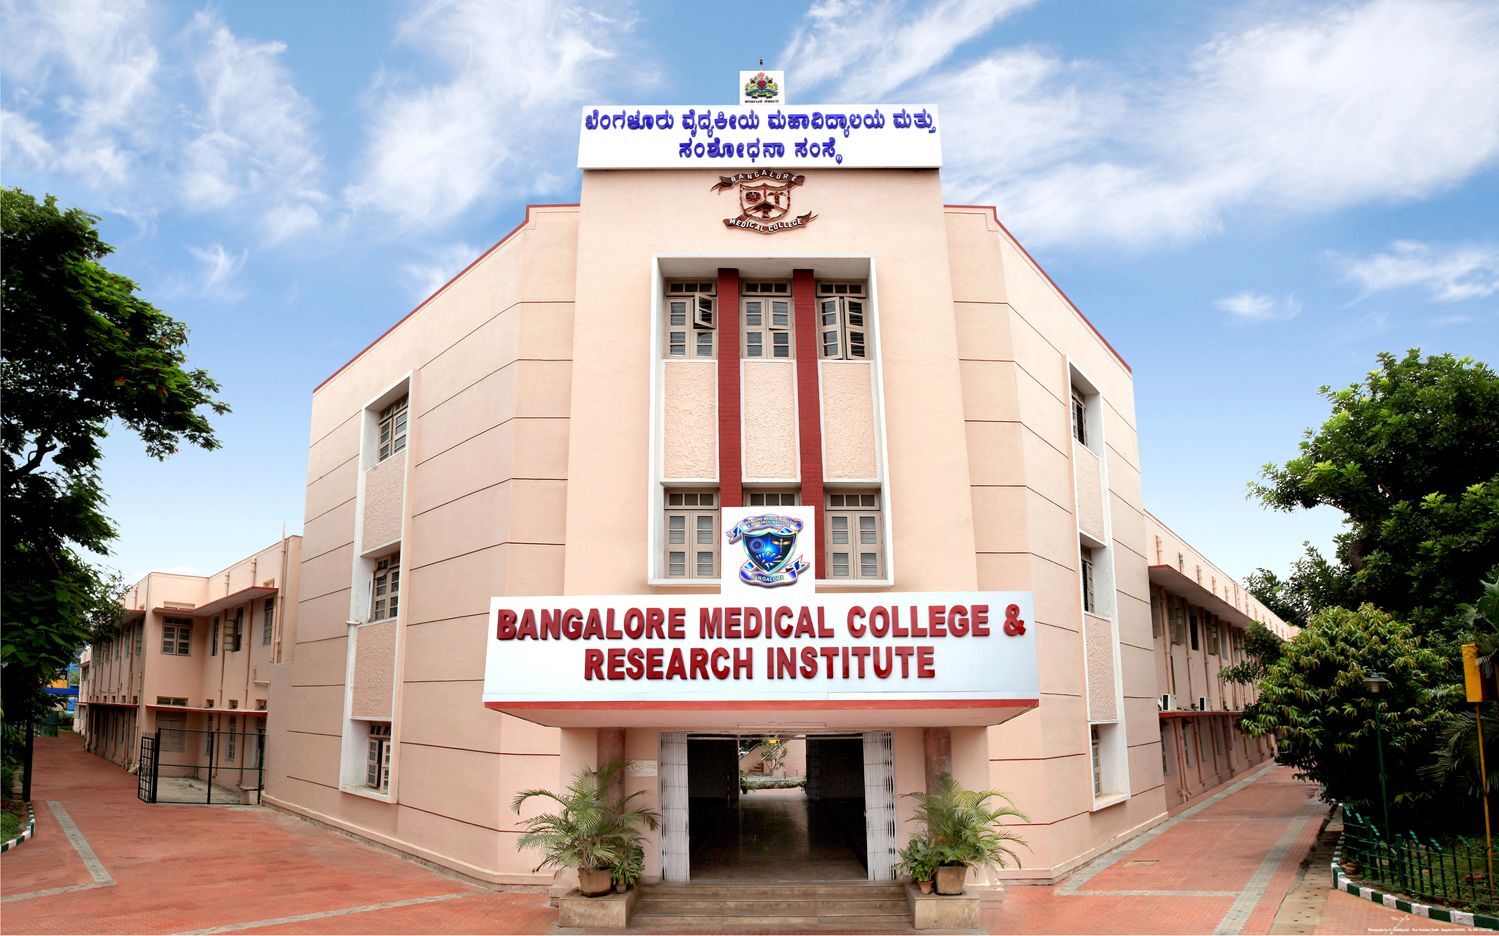 Bangalore Medical College Admission, Fee Structure, Courses Offered, Facilities, Recognition